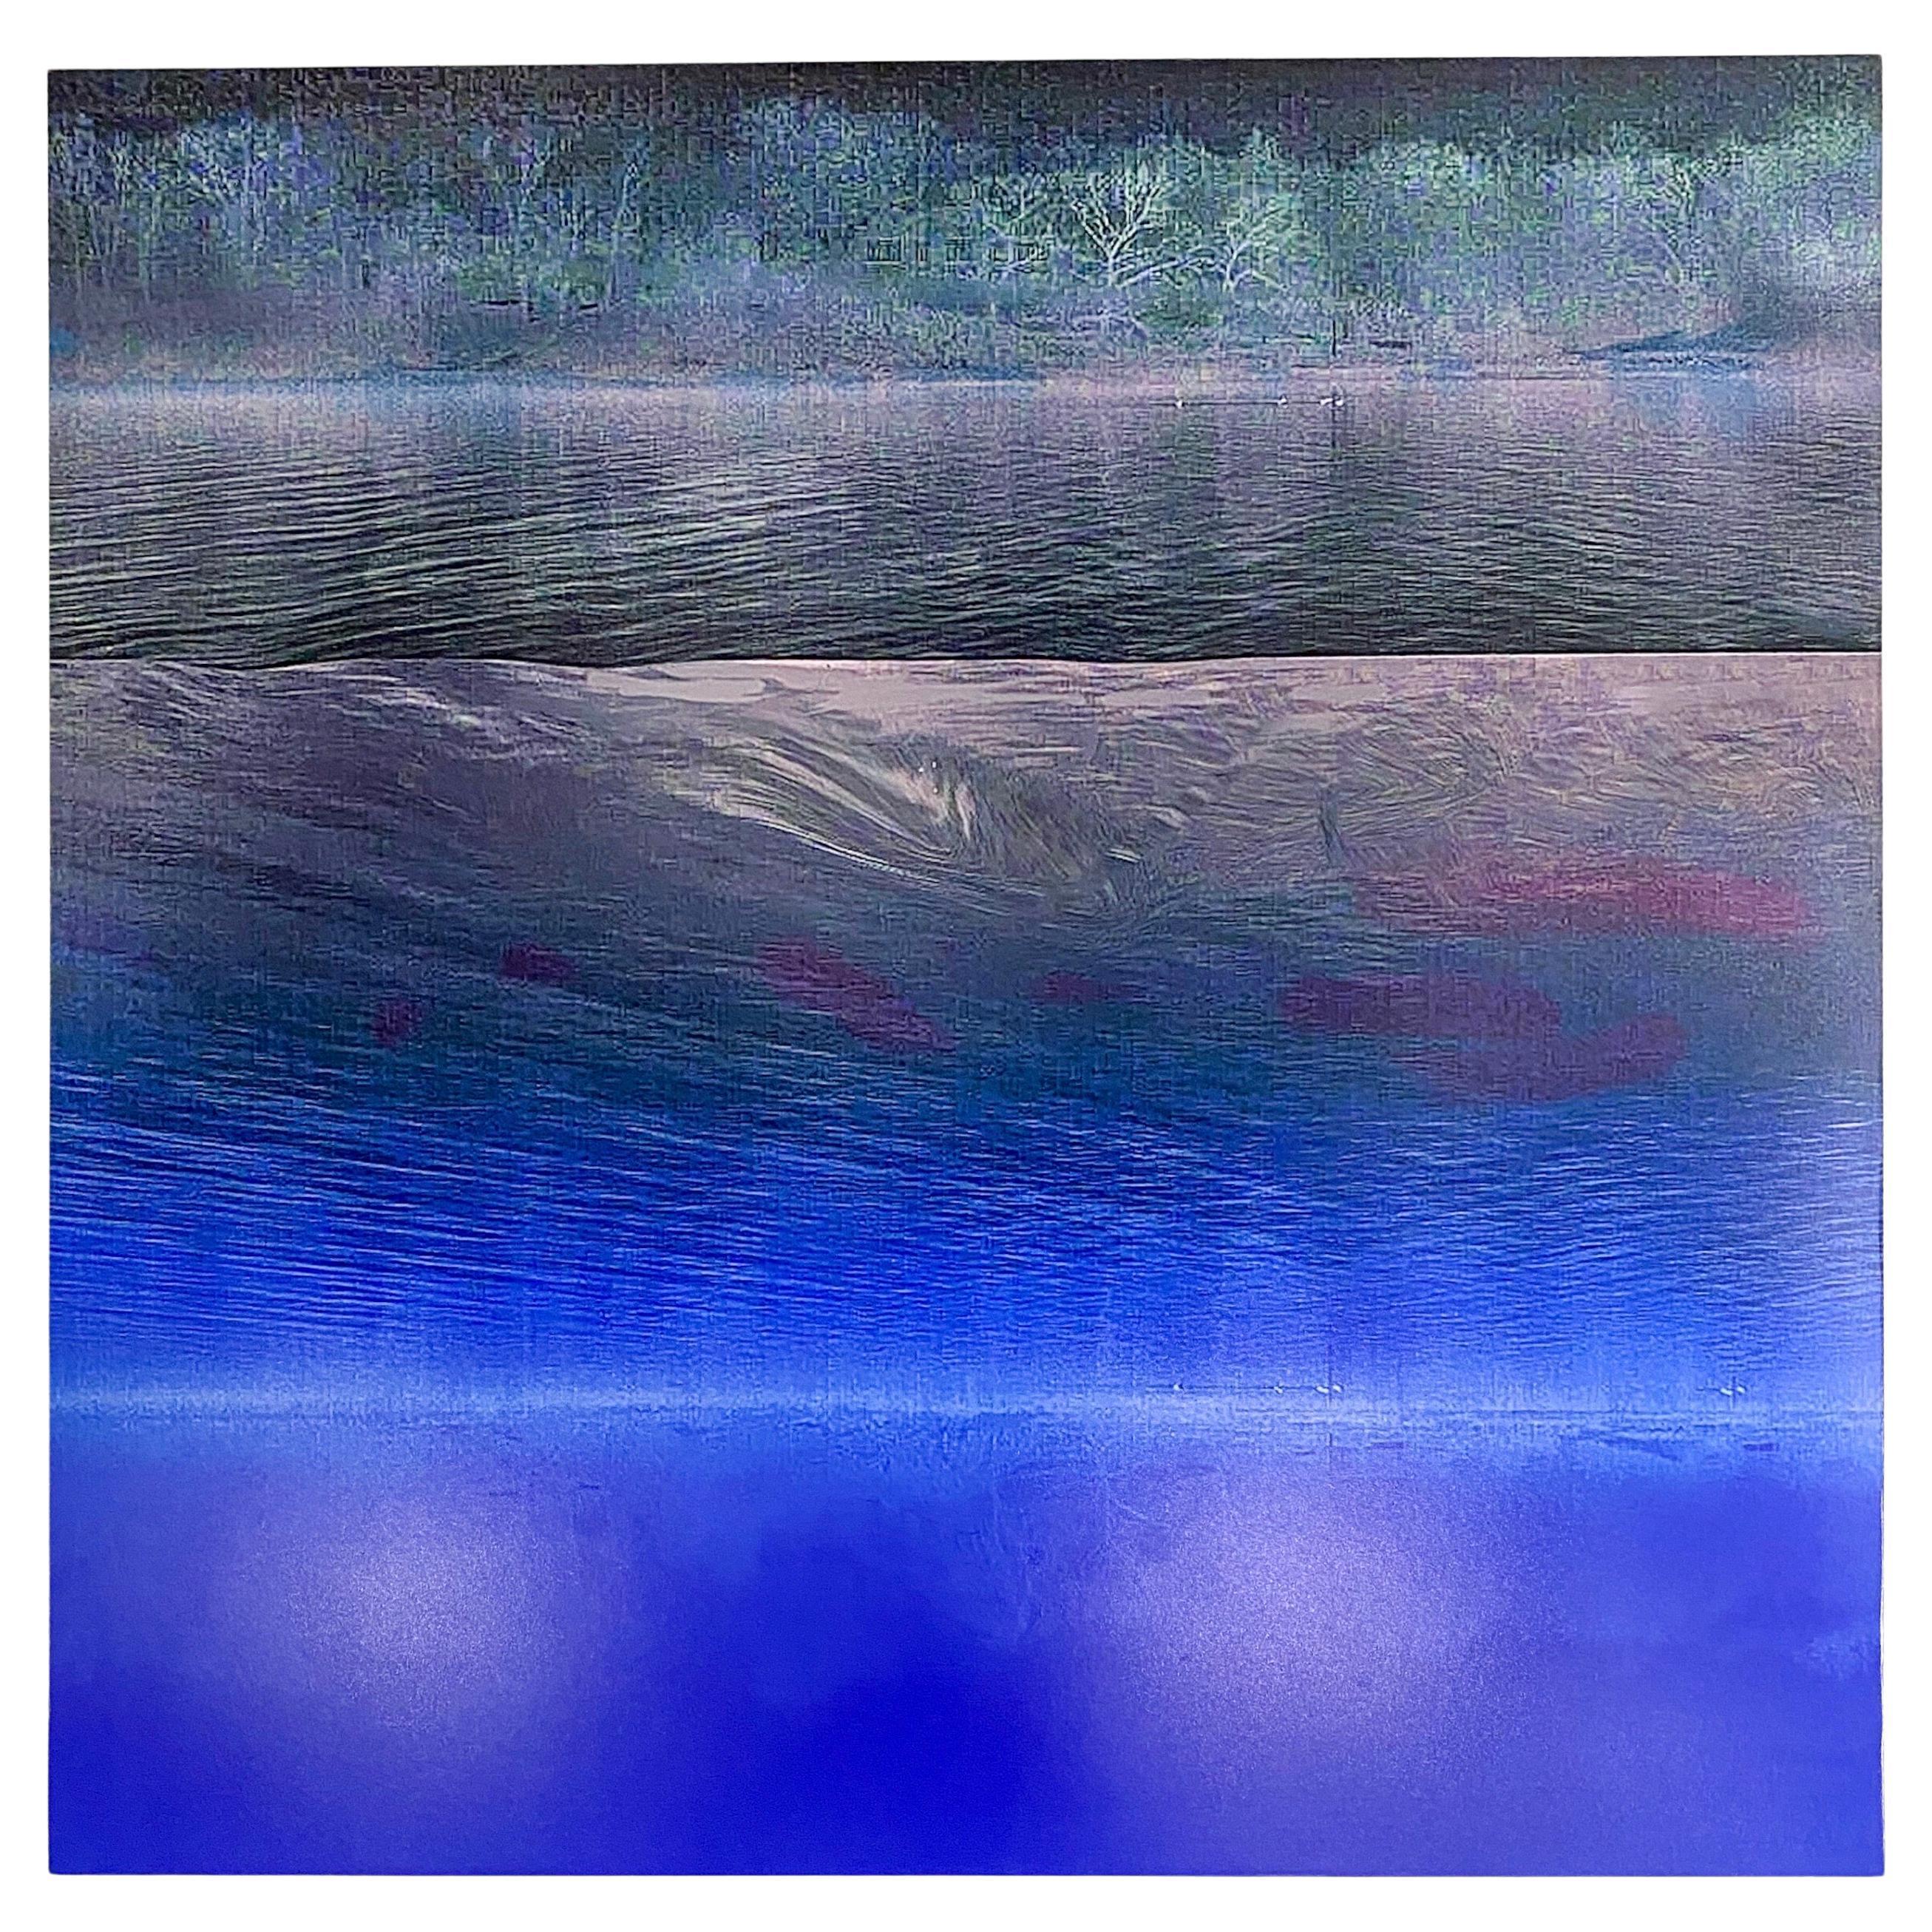 An exquisite photography print titled "Blue Night " by the contemporary artist Marc Vandermeer ( American, 1950's). This art work began as a landscape photo featuring a beautiful lake at night and was digitally transformed to an artistic digital